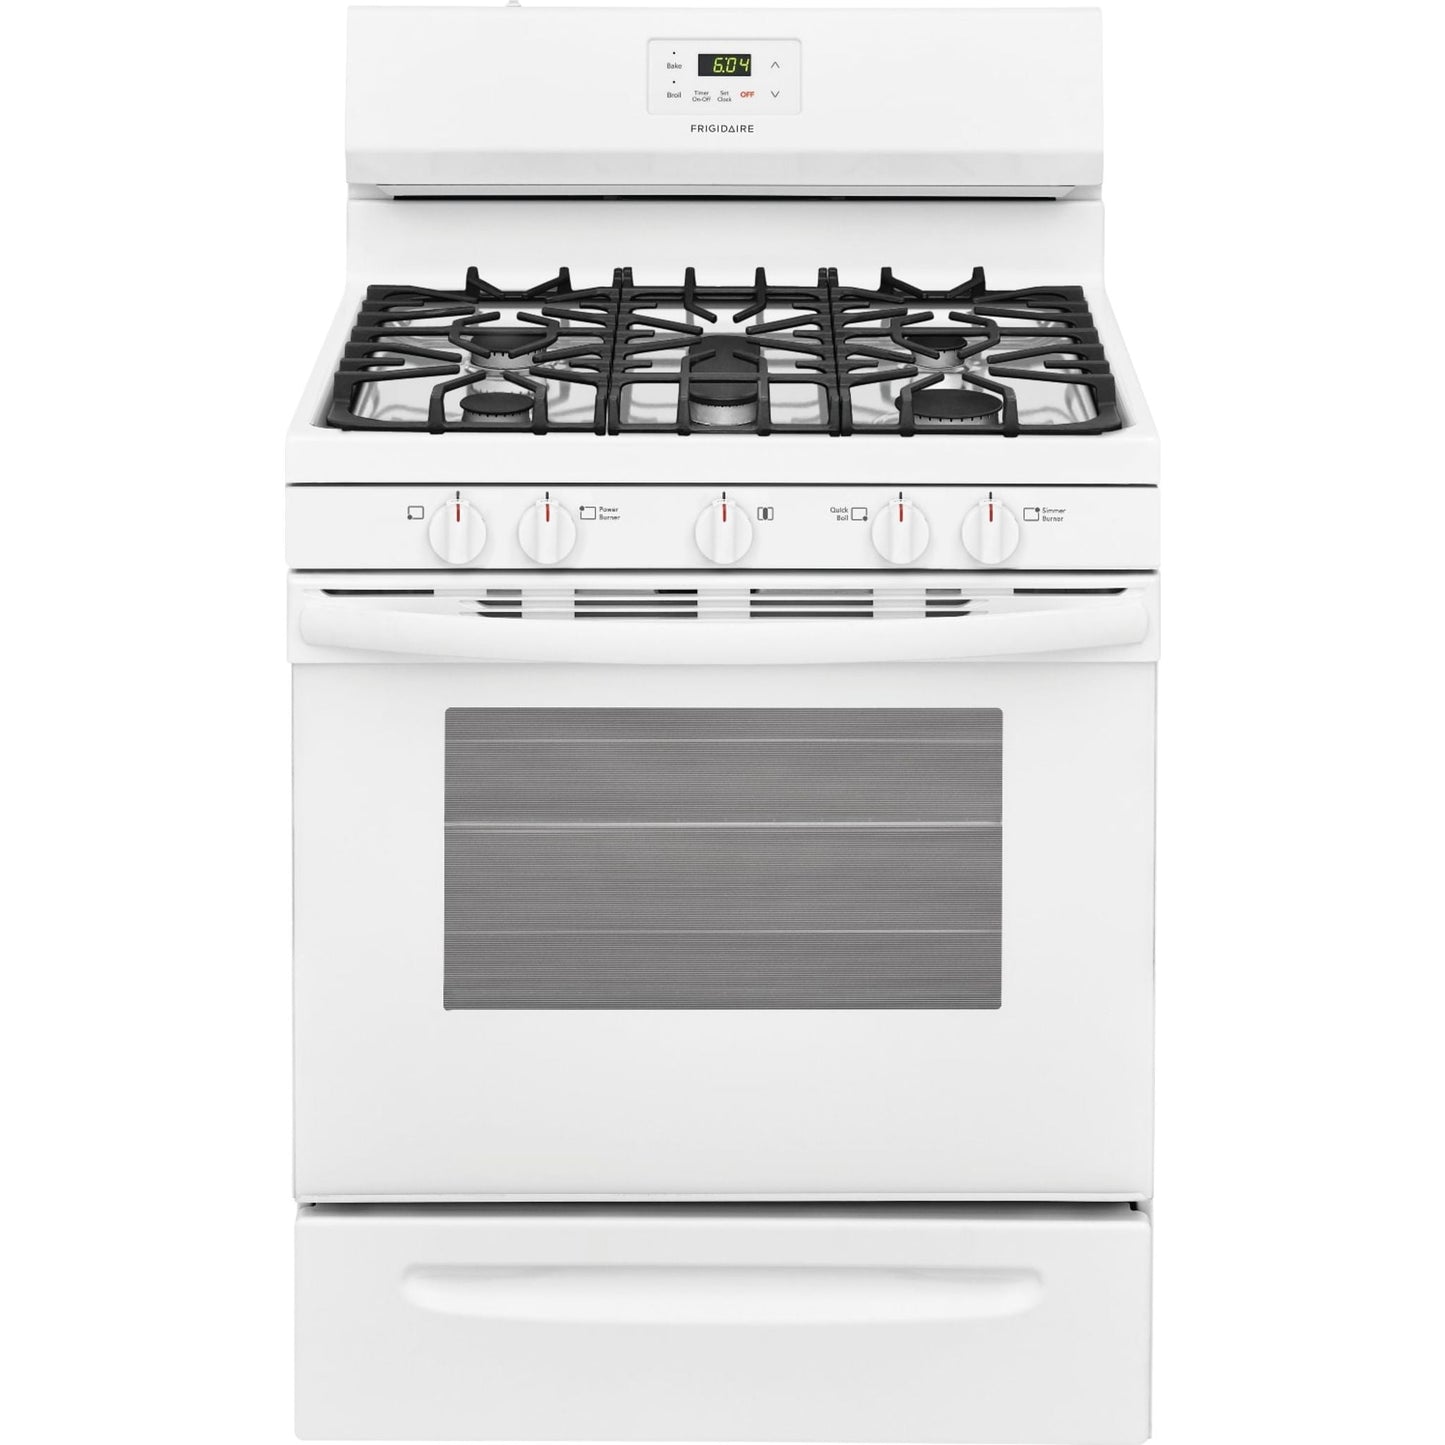 Frigidaire Gas Range (FCRG3052AS) - Stainless Steel